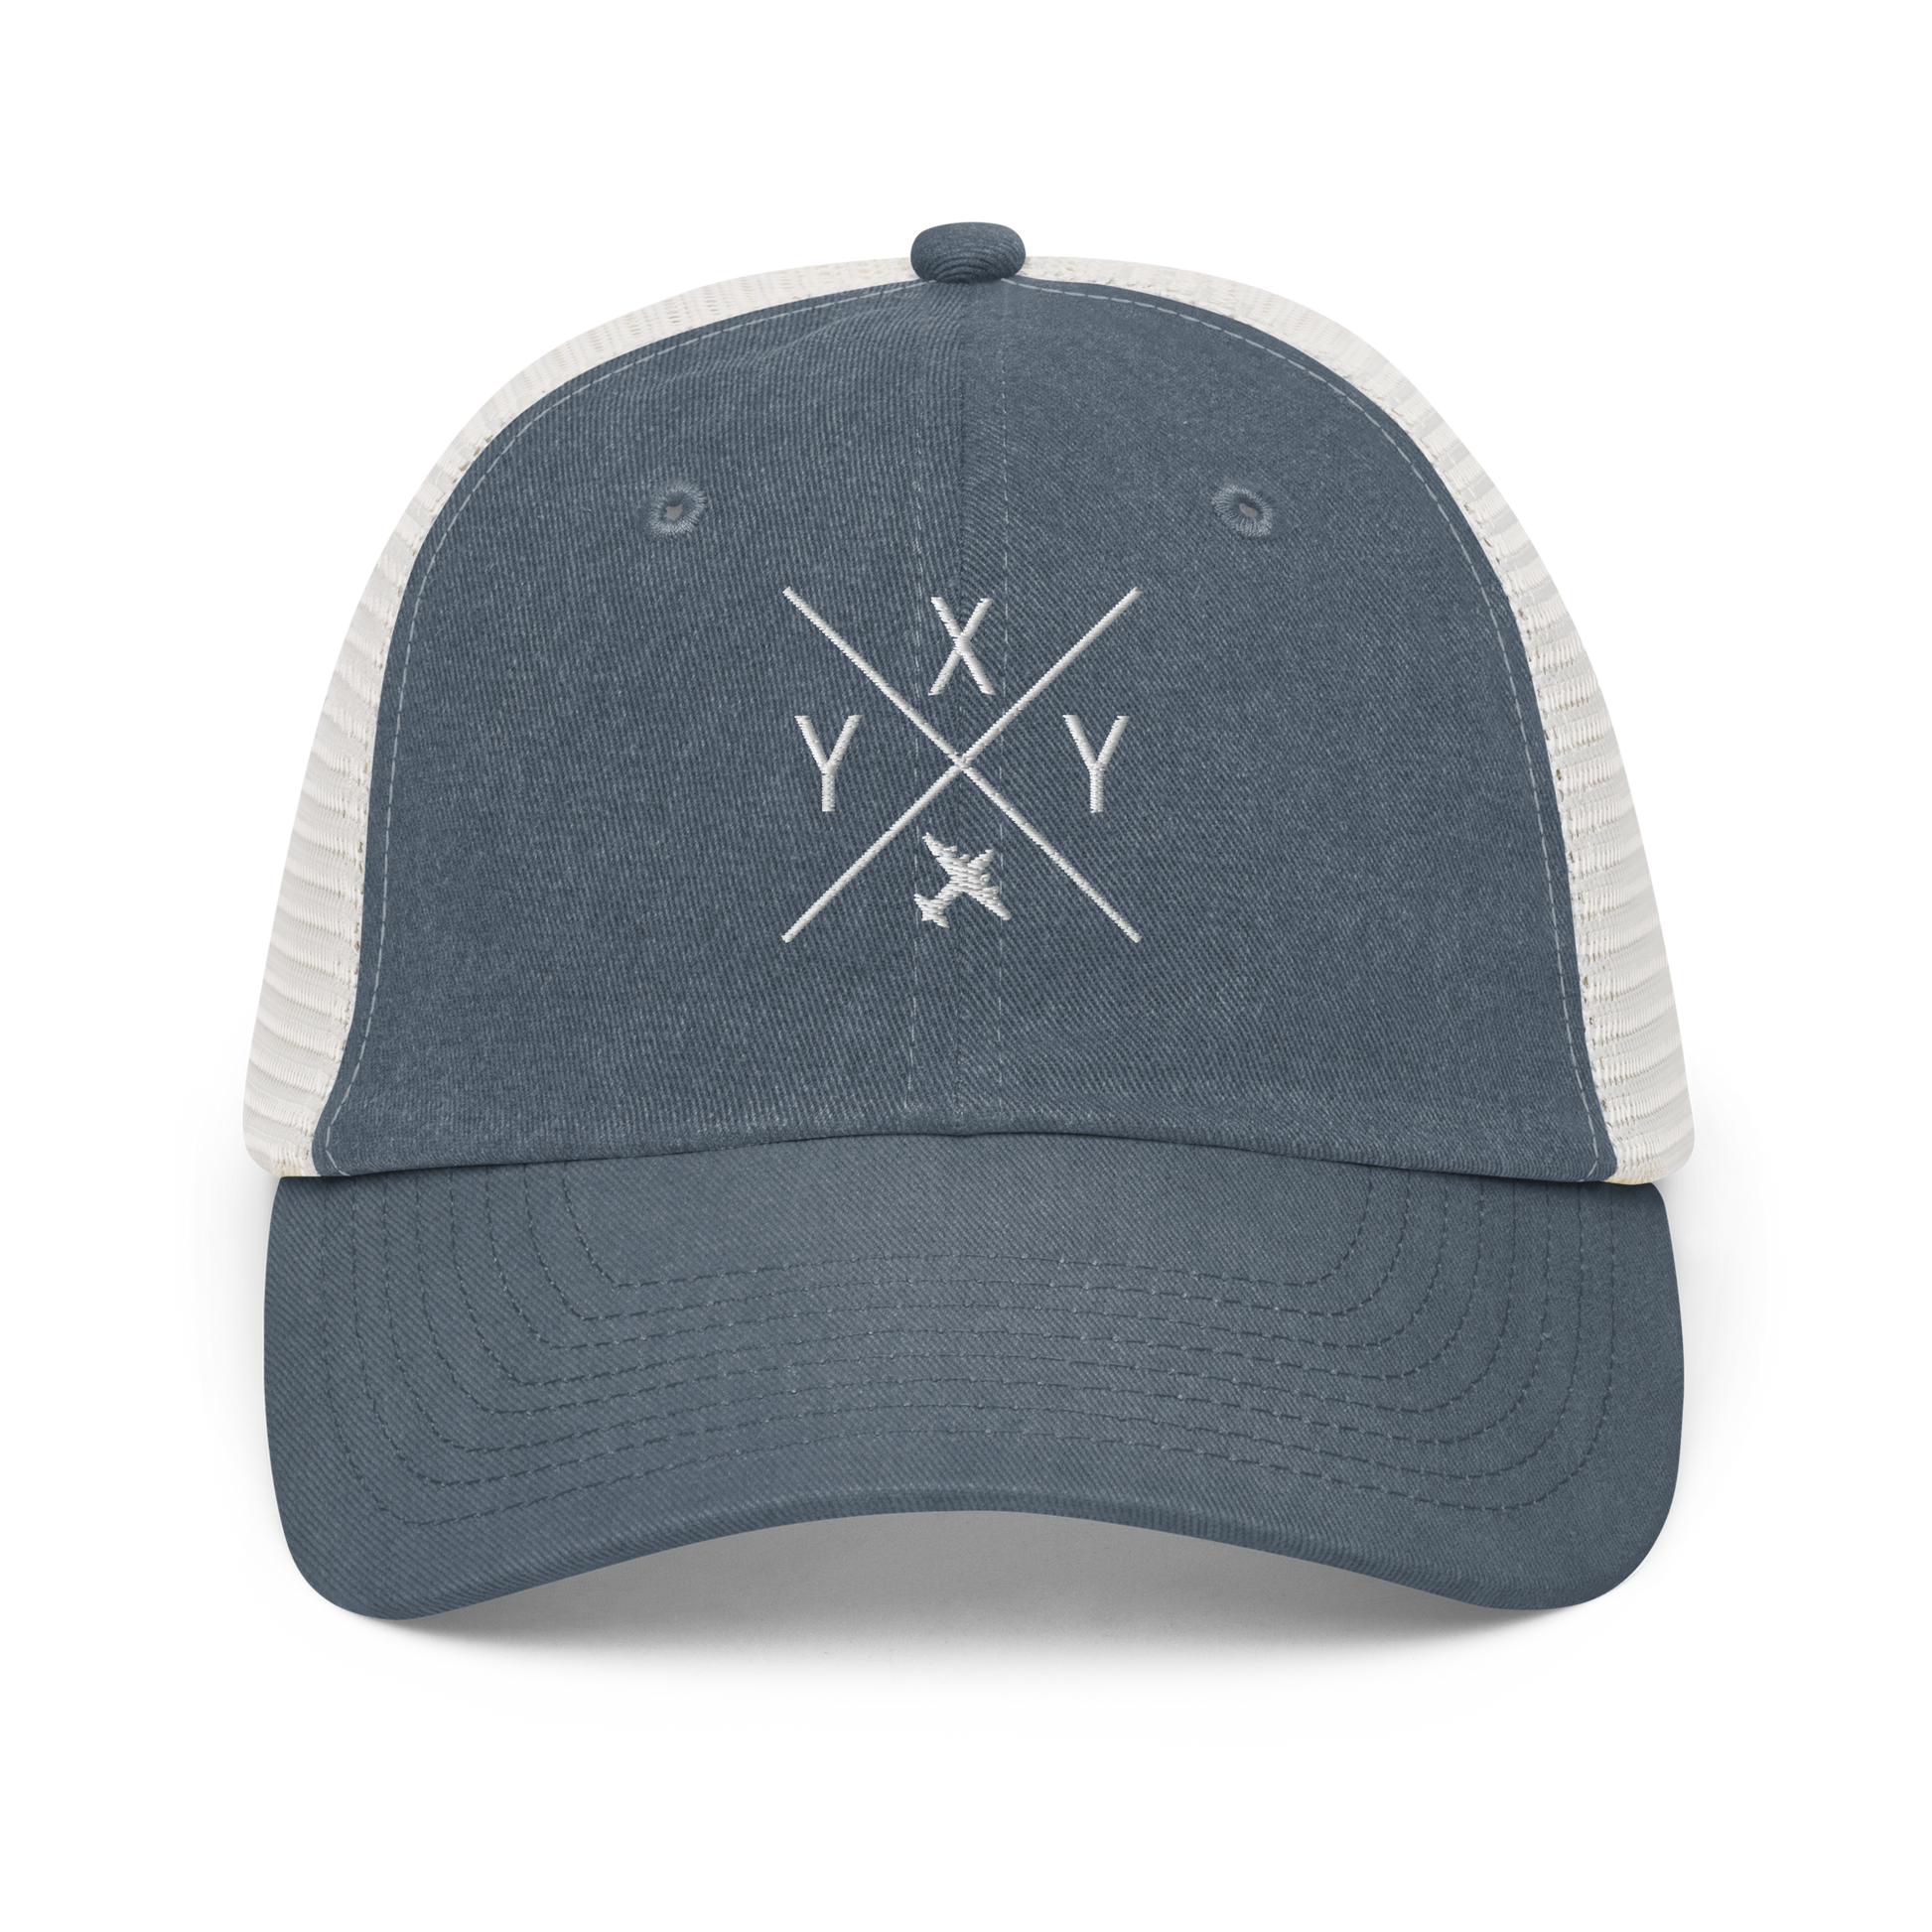 Crossed-X Pigment-Dyed Trucker Cap • YXY Whitehorse • YHM Designs - Image 06